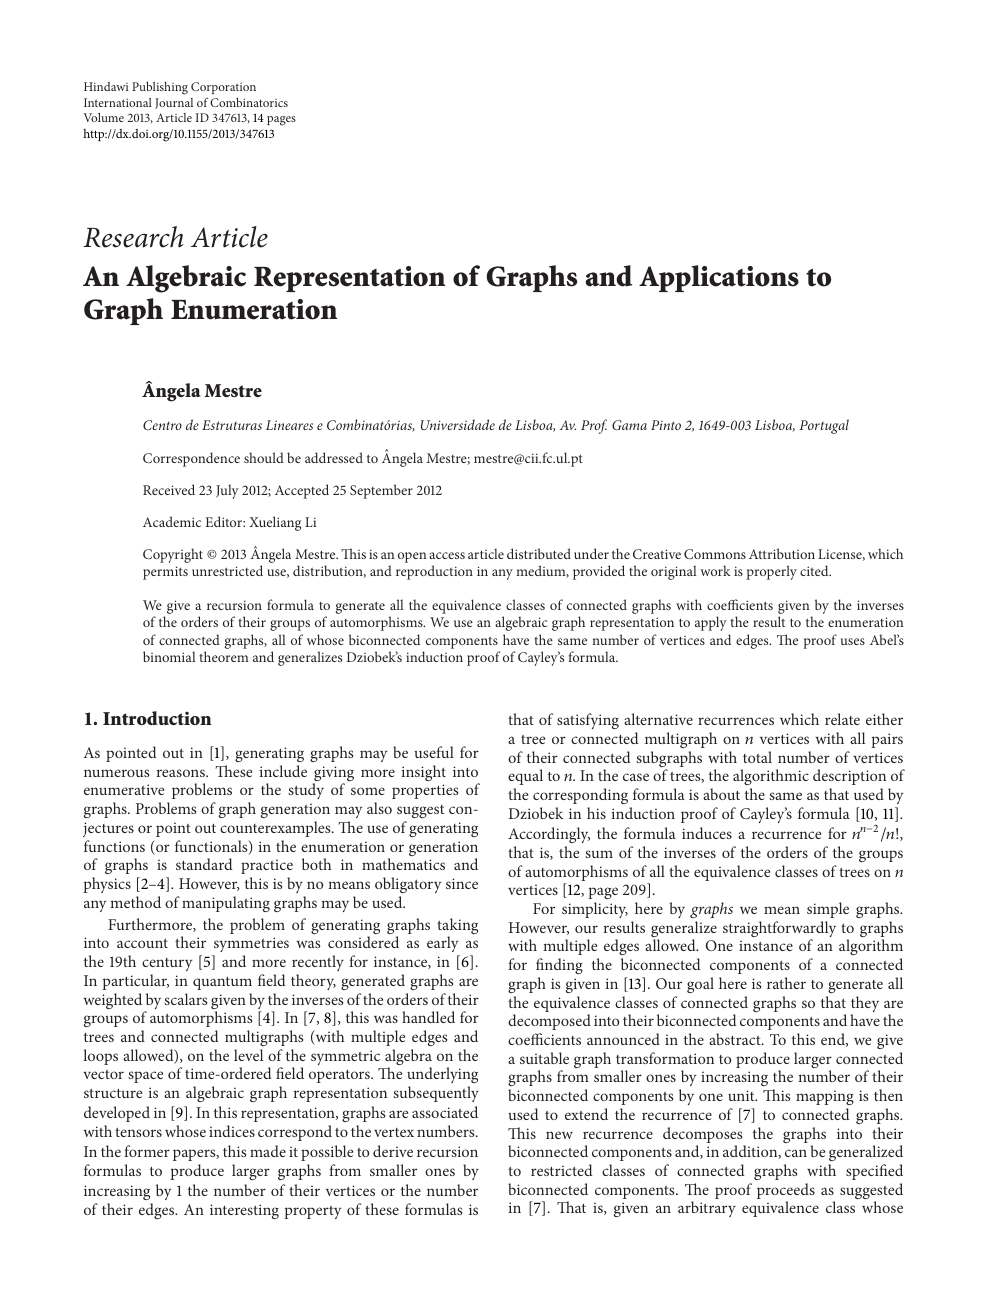 An Algebraic Representation Of Graphs And Applications To Graph Enumeration Topic Of Research Paper In Mathematics Download Scholarly Article Pdf And Read For Free On Cyberleninka Open Science Hub